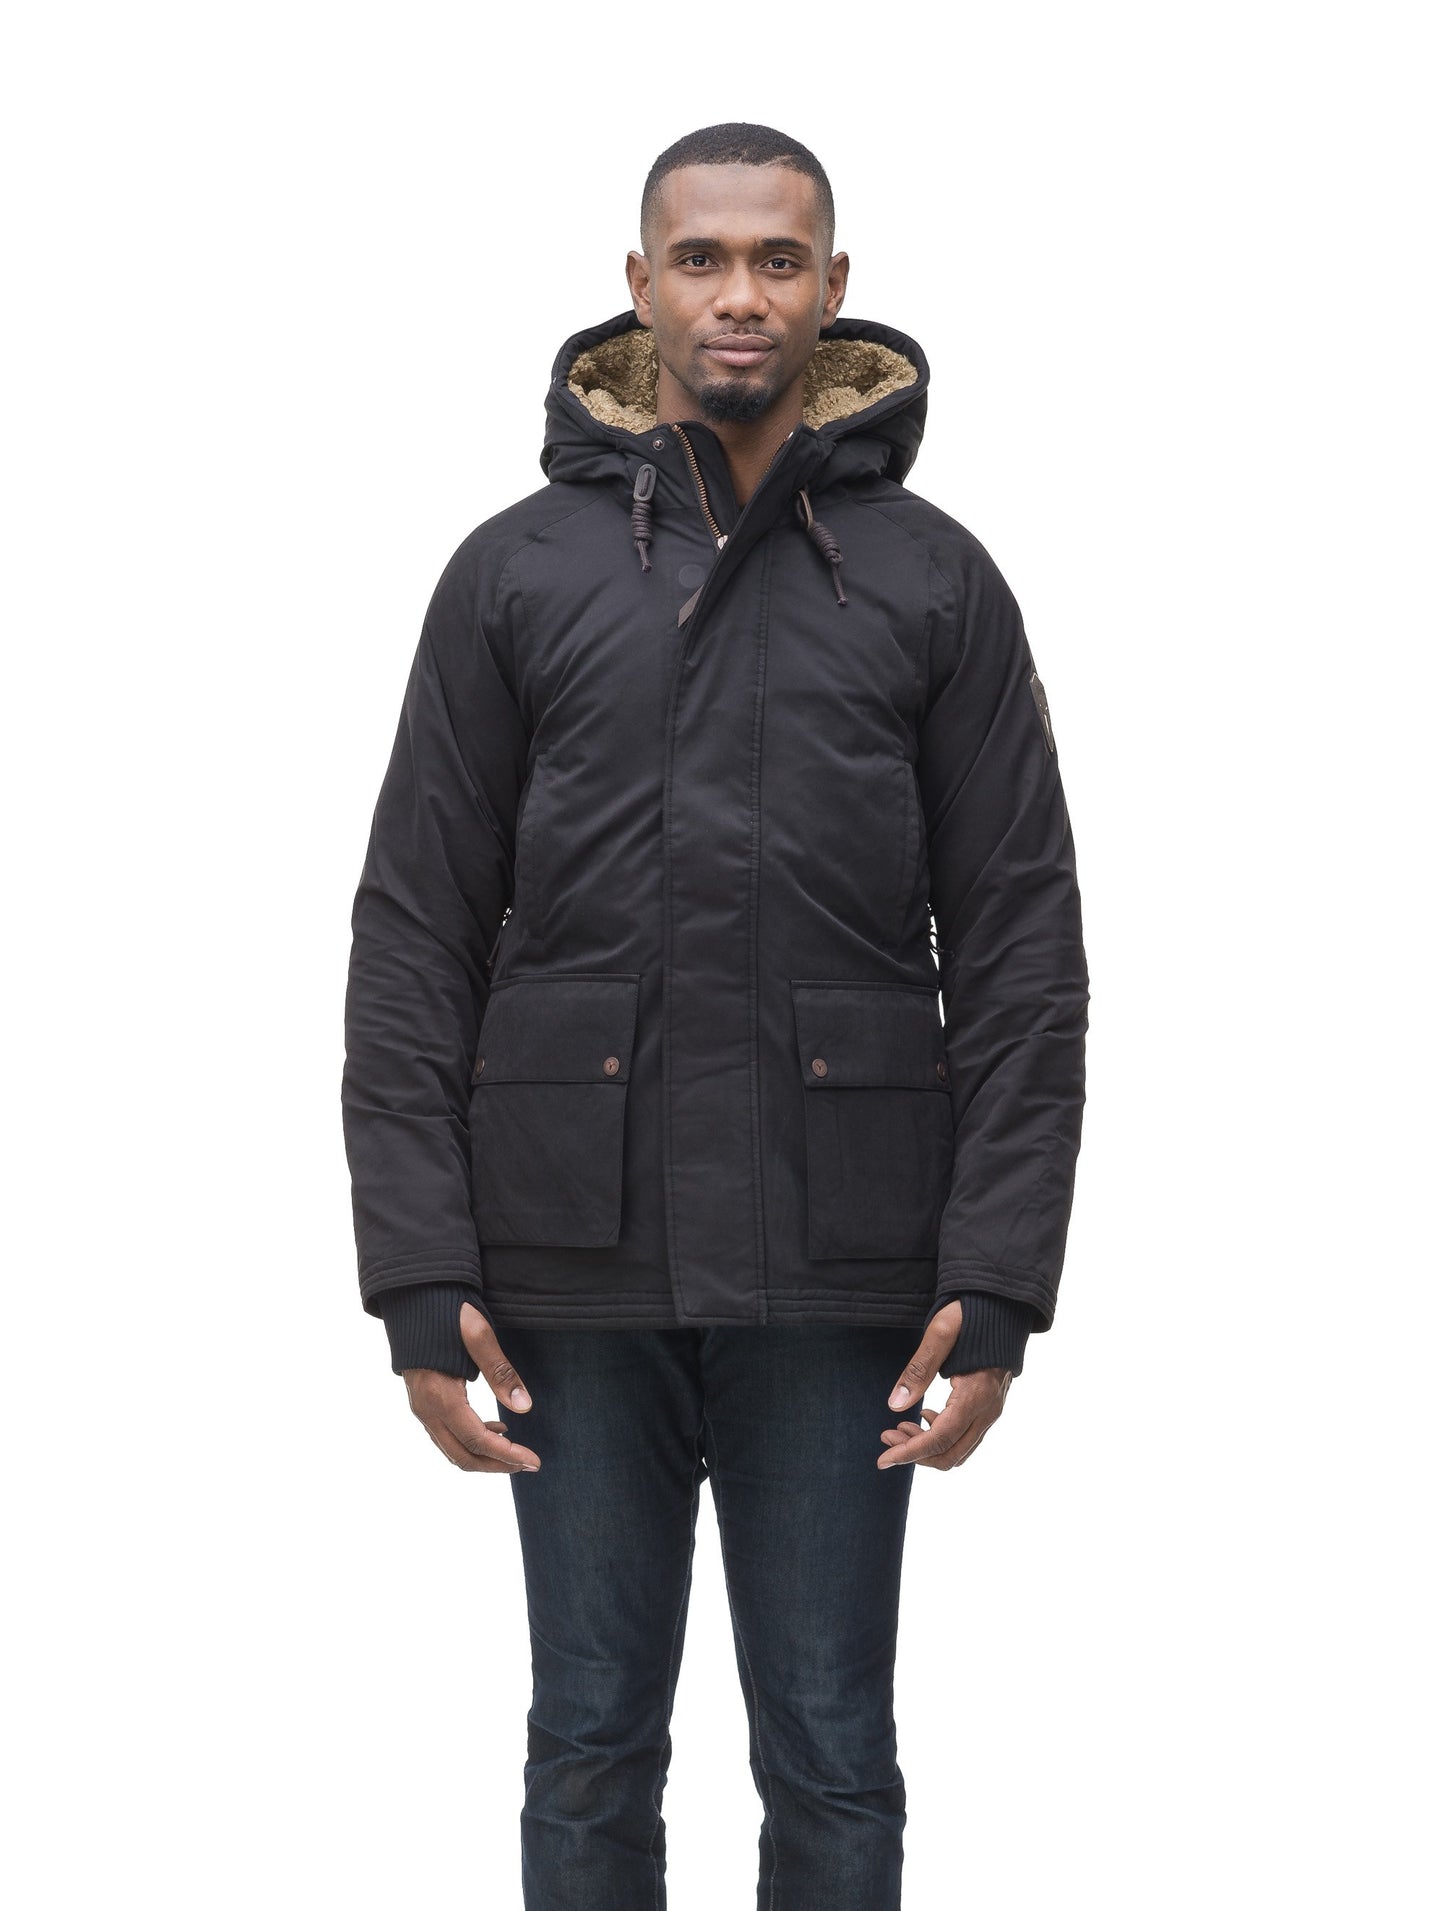 Men's town coat with Berber lined convertible collar and hood in Black